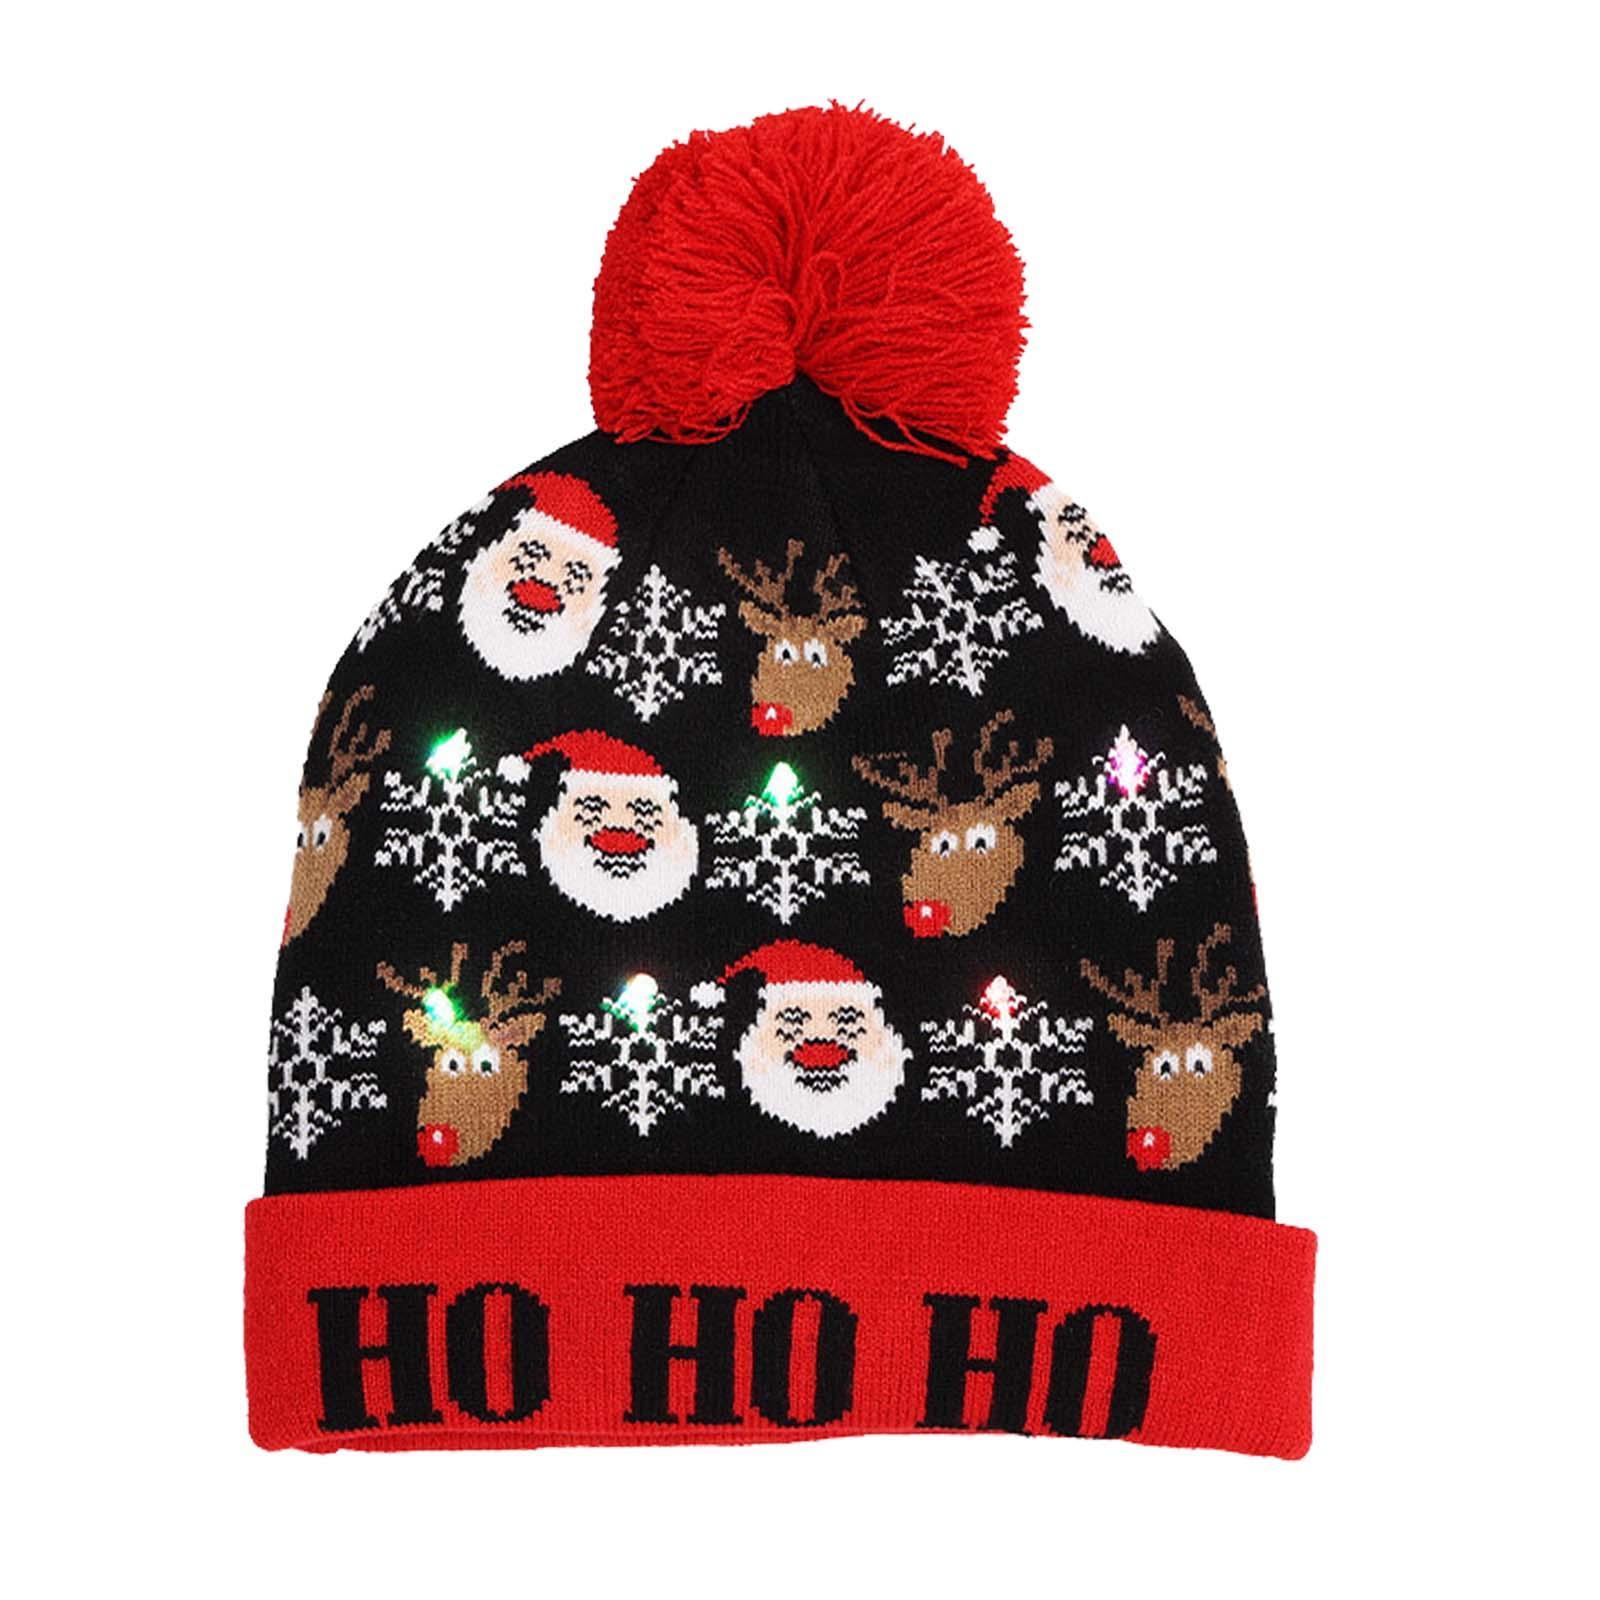 Light up Christmas Hat Headgear LED Light Knitted Hat for Outdoor Xmas Party